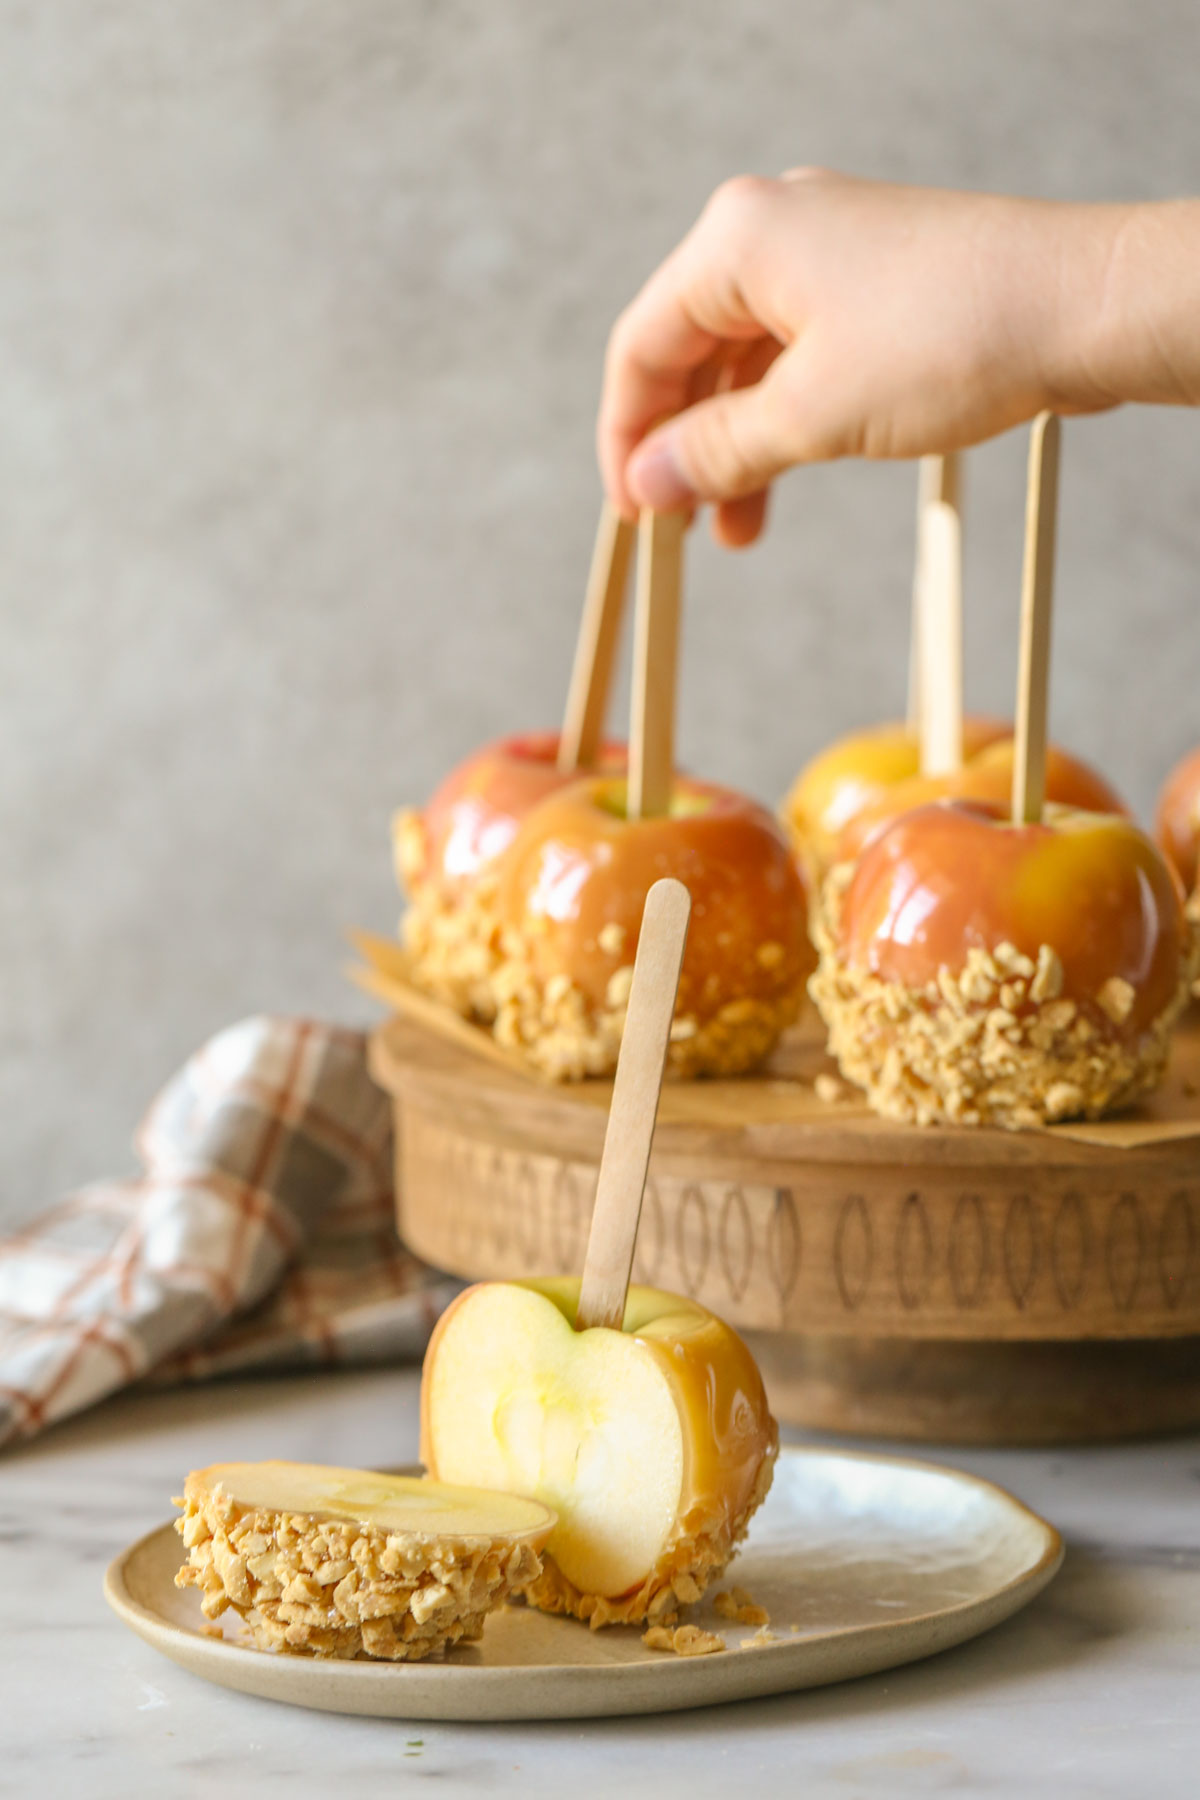 A Homemade Caramel Apple on a plate that has been cut in half, with more Homemade Caramel Apples on a wood stand in the background.  